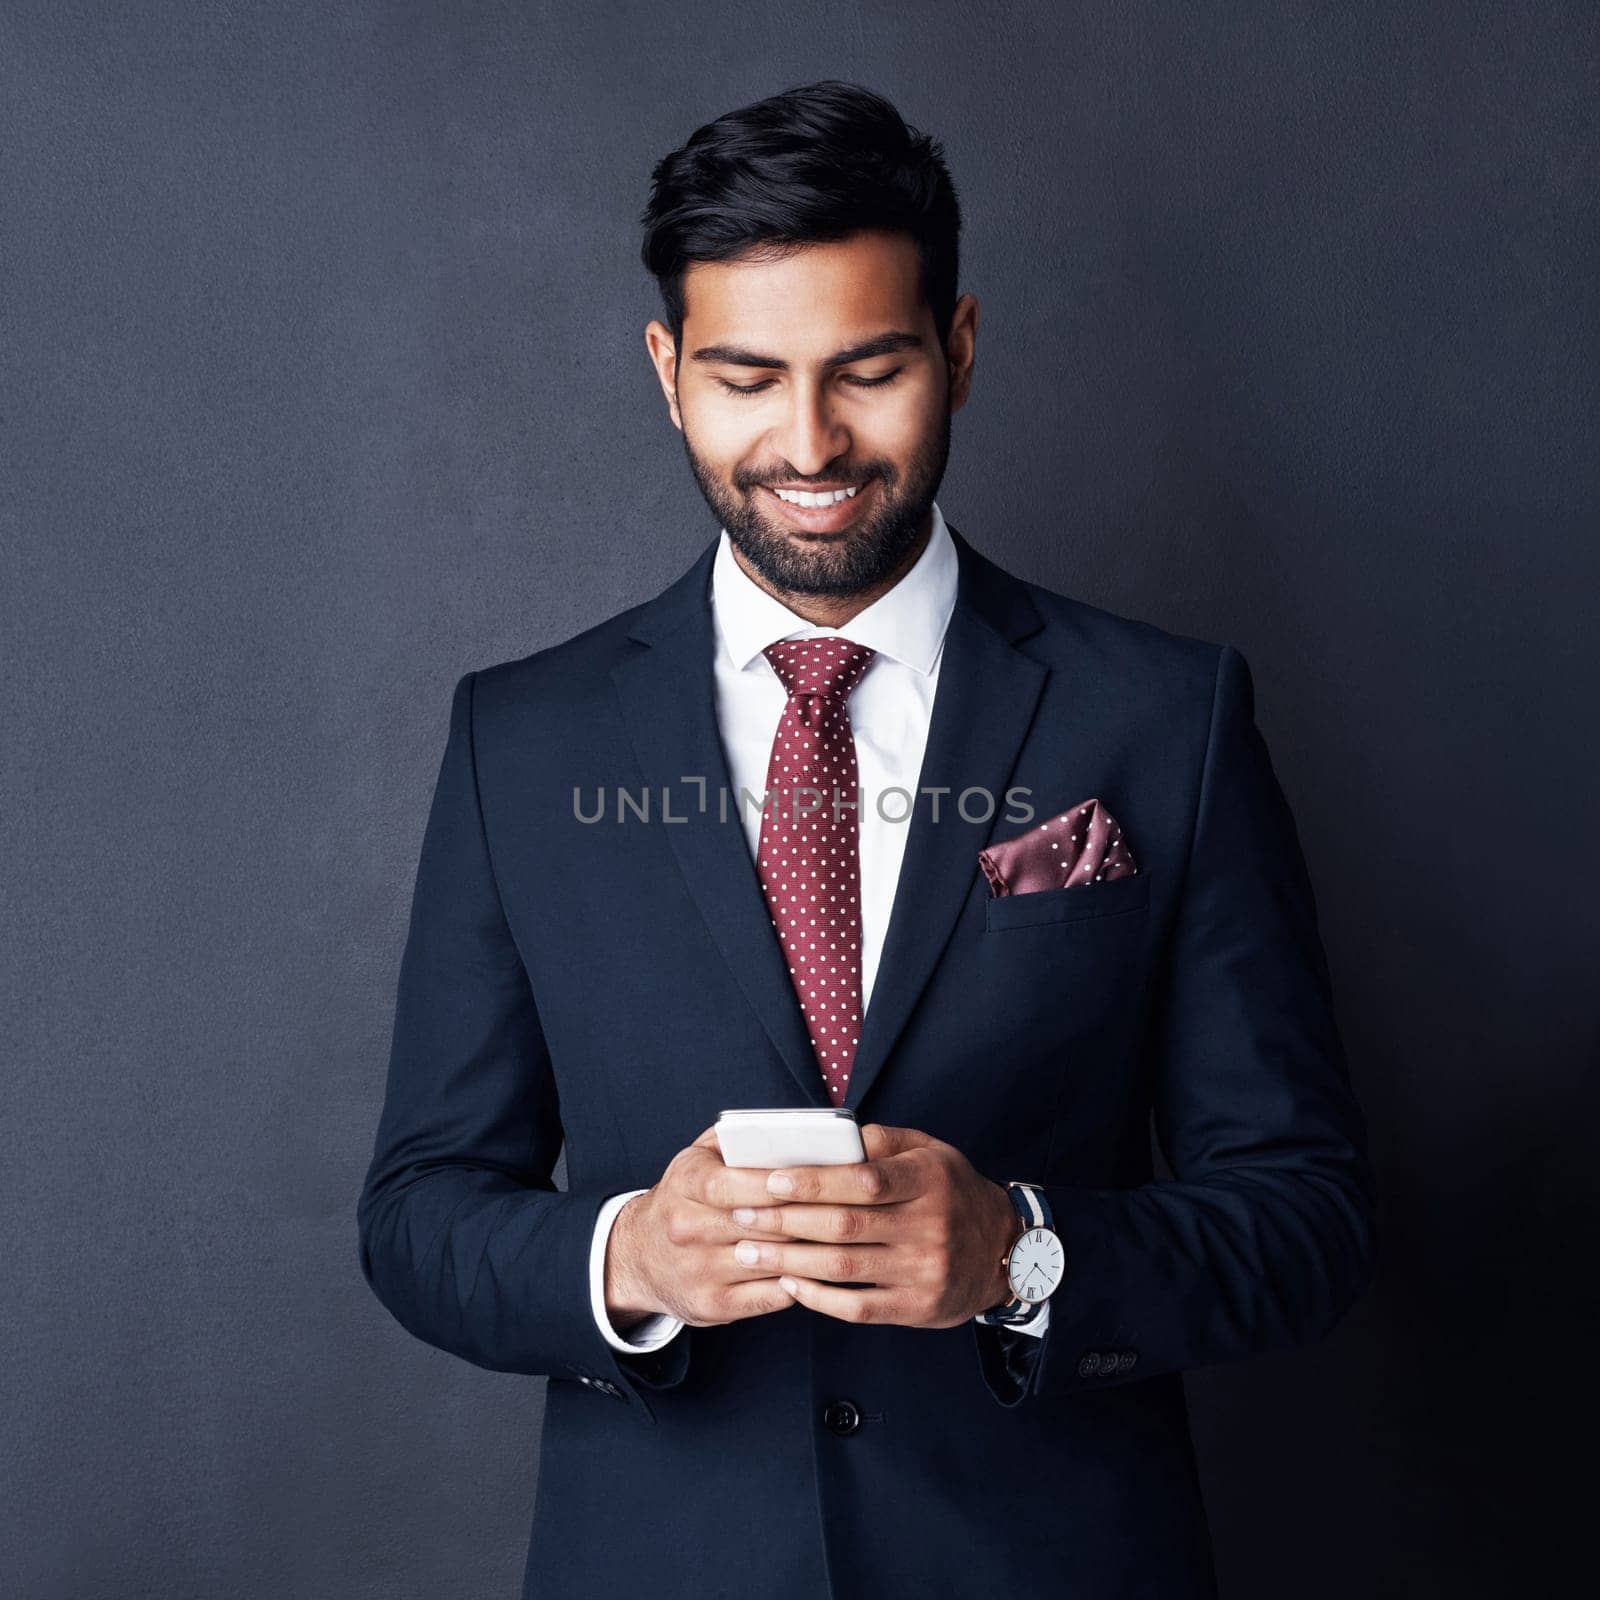 Keeping his career on track by staying connected. Studio shot of a young businessman using a mobile phone against a gray background